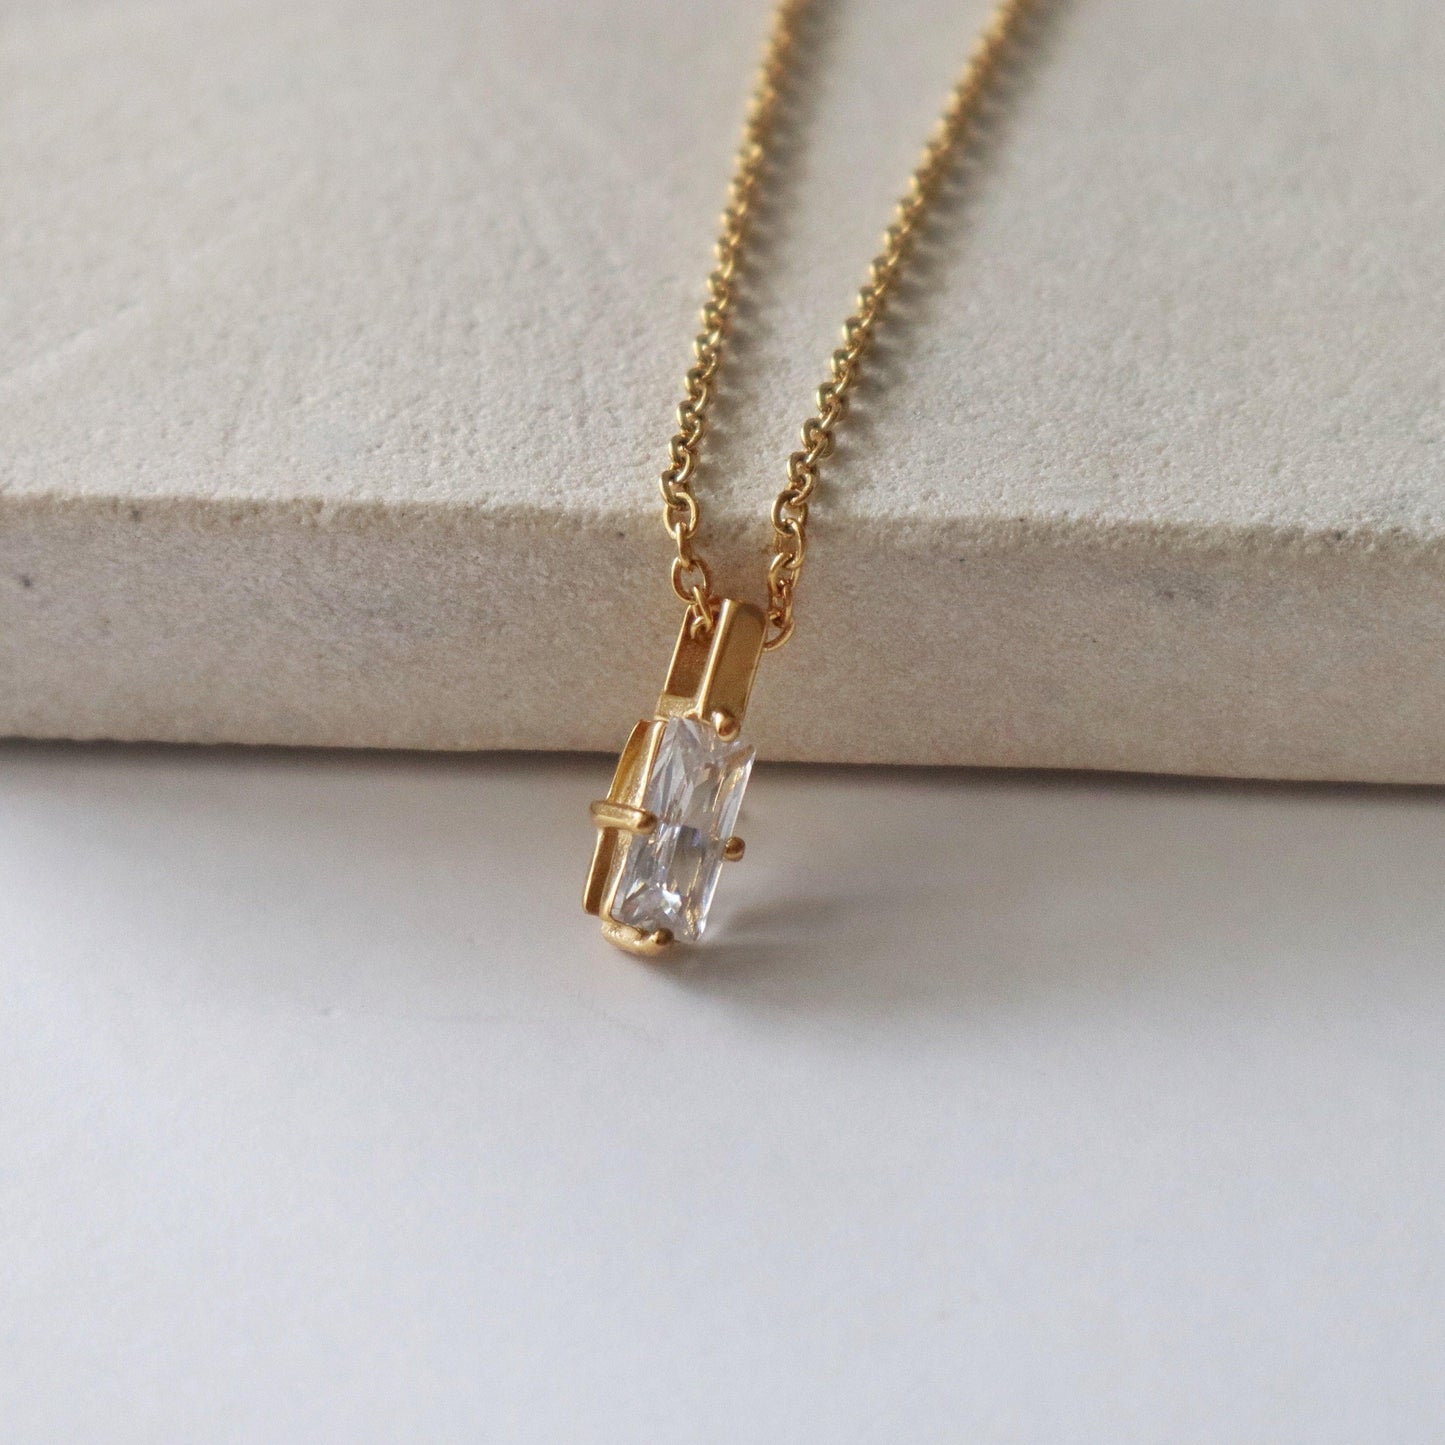 Haven Necklace | Pendant Necklace - JESSA JEWELRY | GOLD JEWELRY; dainty, affordable gold everyday jewelry. Tarnish free, water-resistant, hypoallergenic. Jewelry for everyday wear